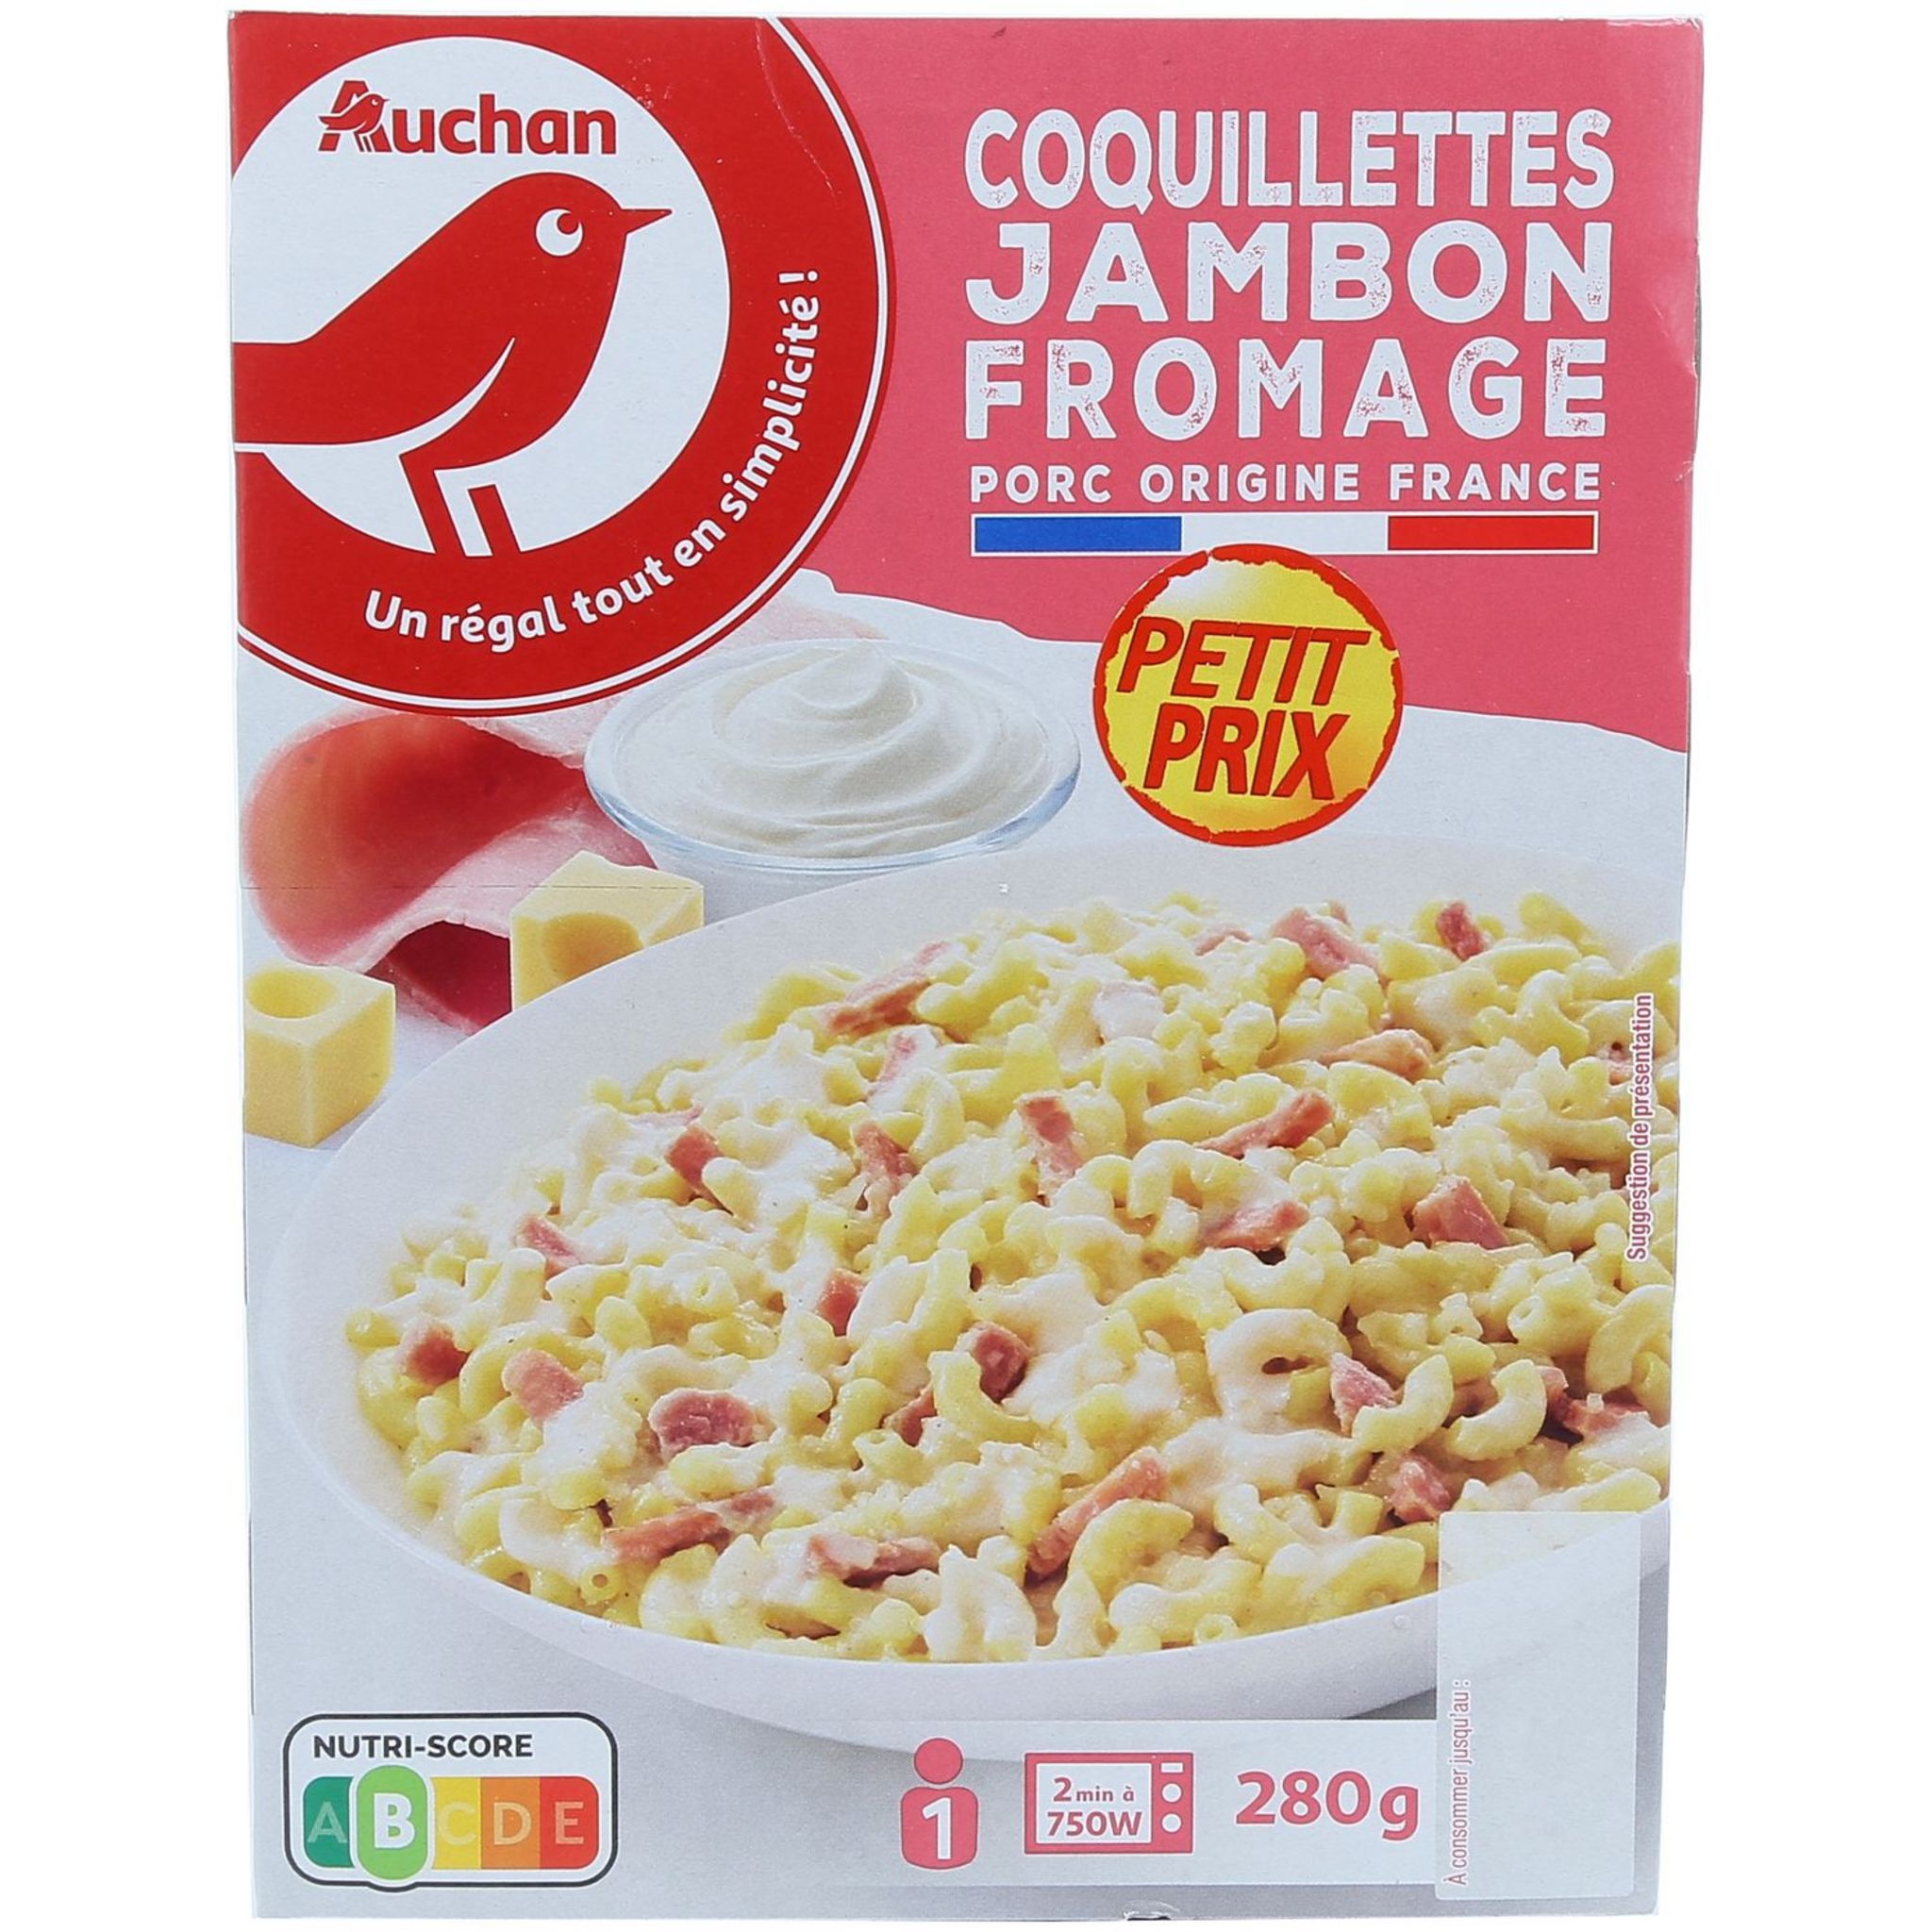 Coquillettes jambon fromage - recette facile